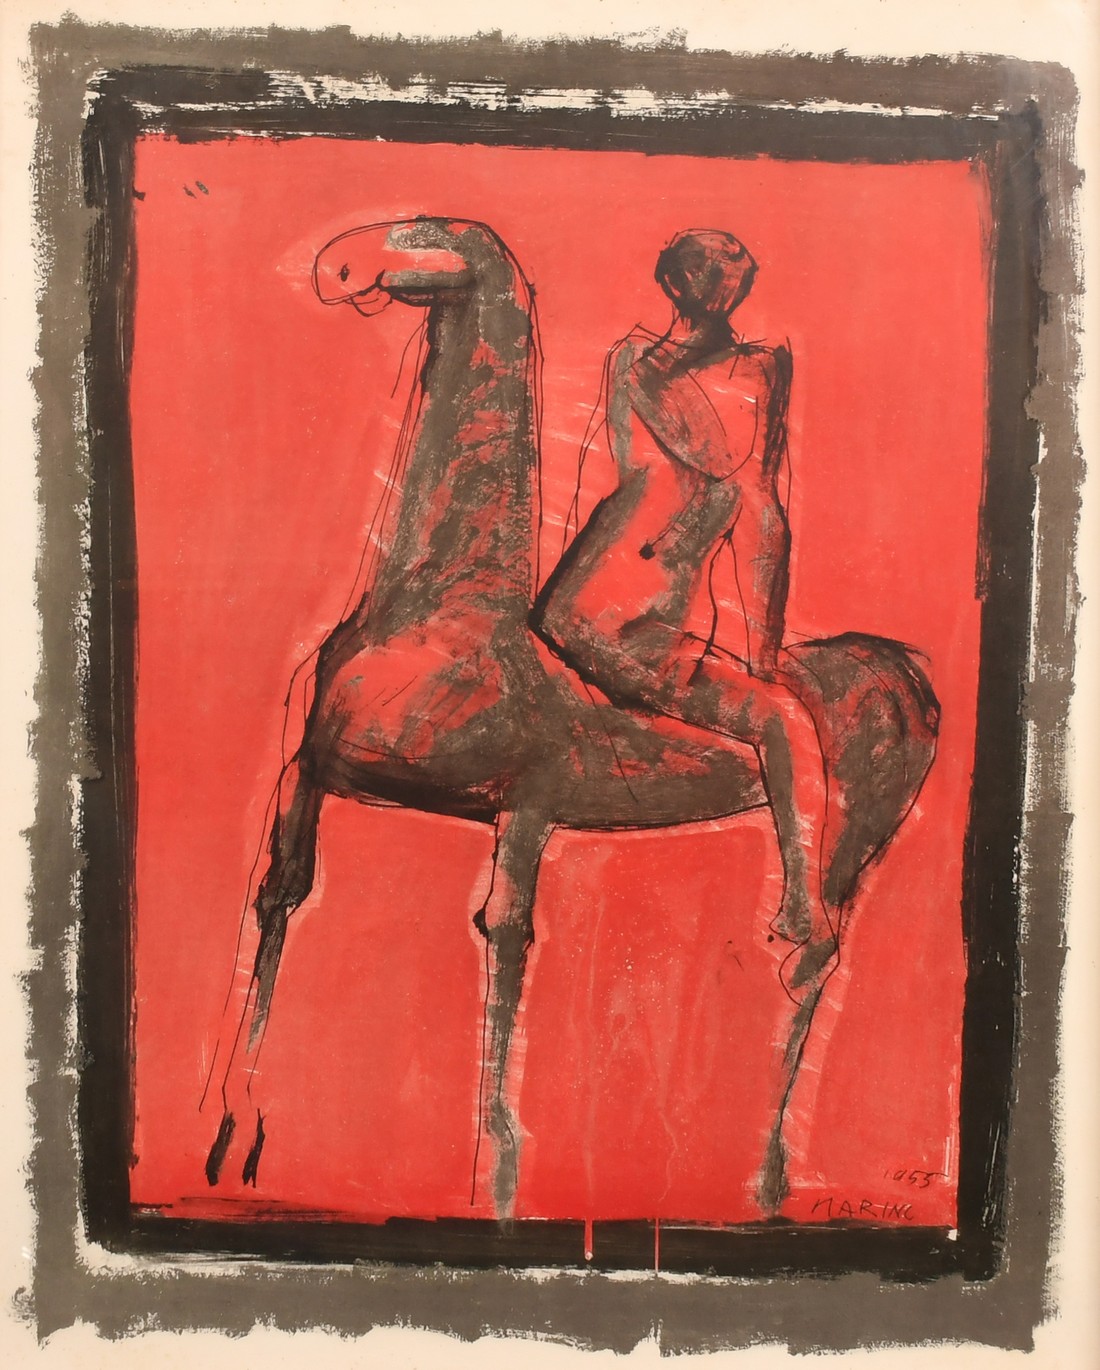 Marino Marini, 'Le Cavalier', man on a horse, colour lithograph, signed and dated 1955 in the stone,